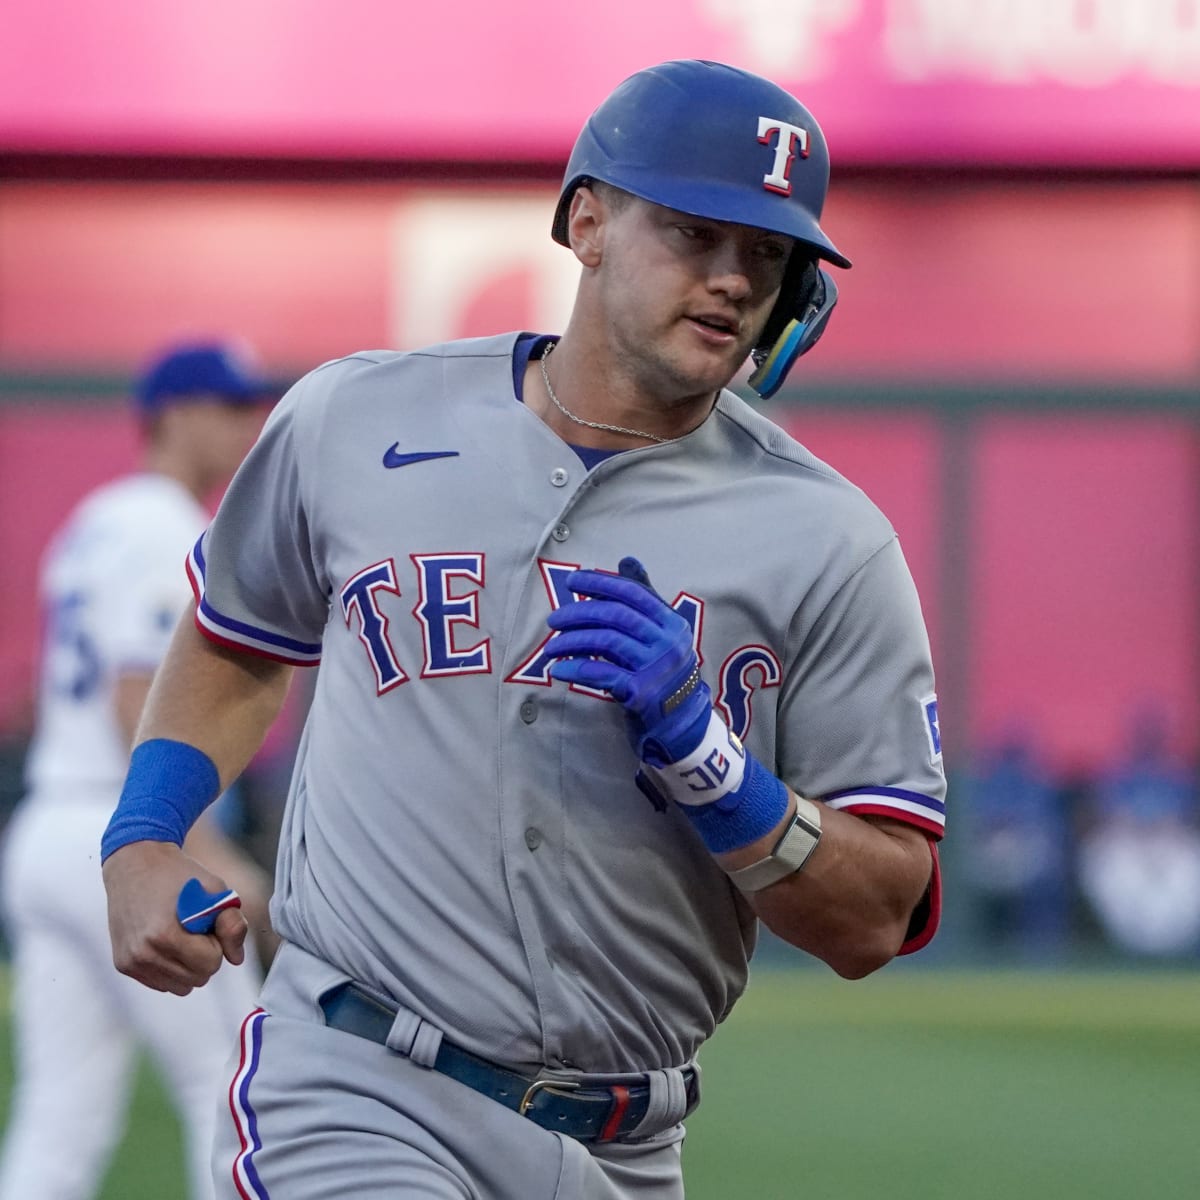 Jacob deGrom, Nathan Eovaldi give Texas Rangers the best 1-2 punch